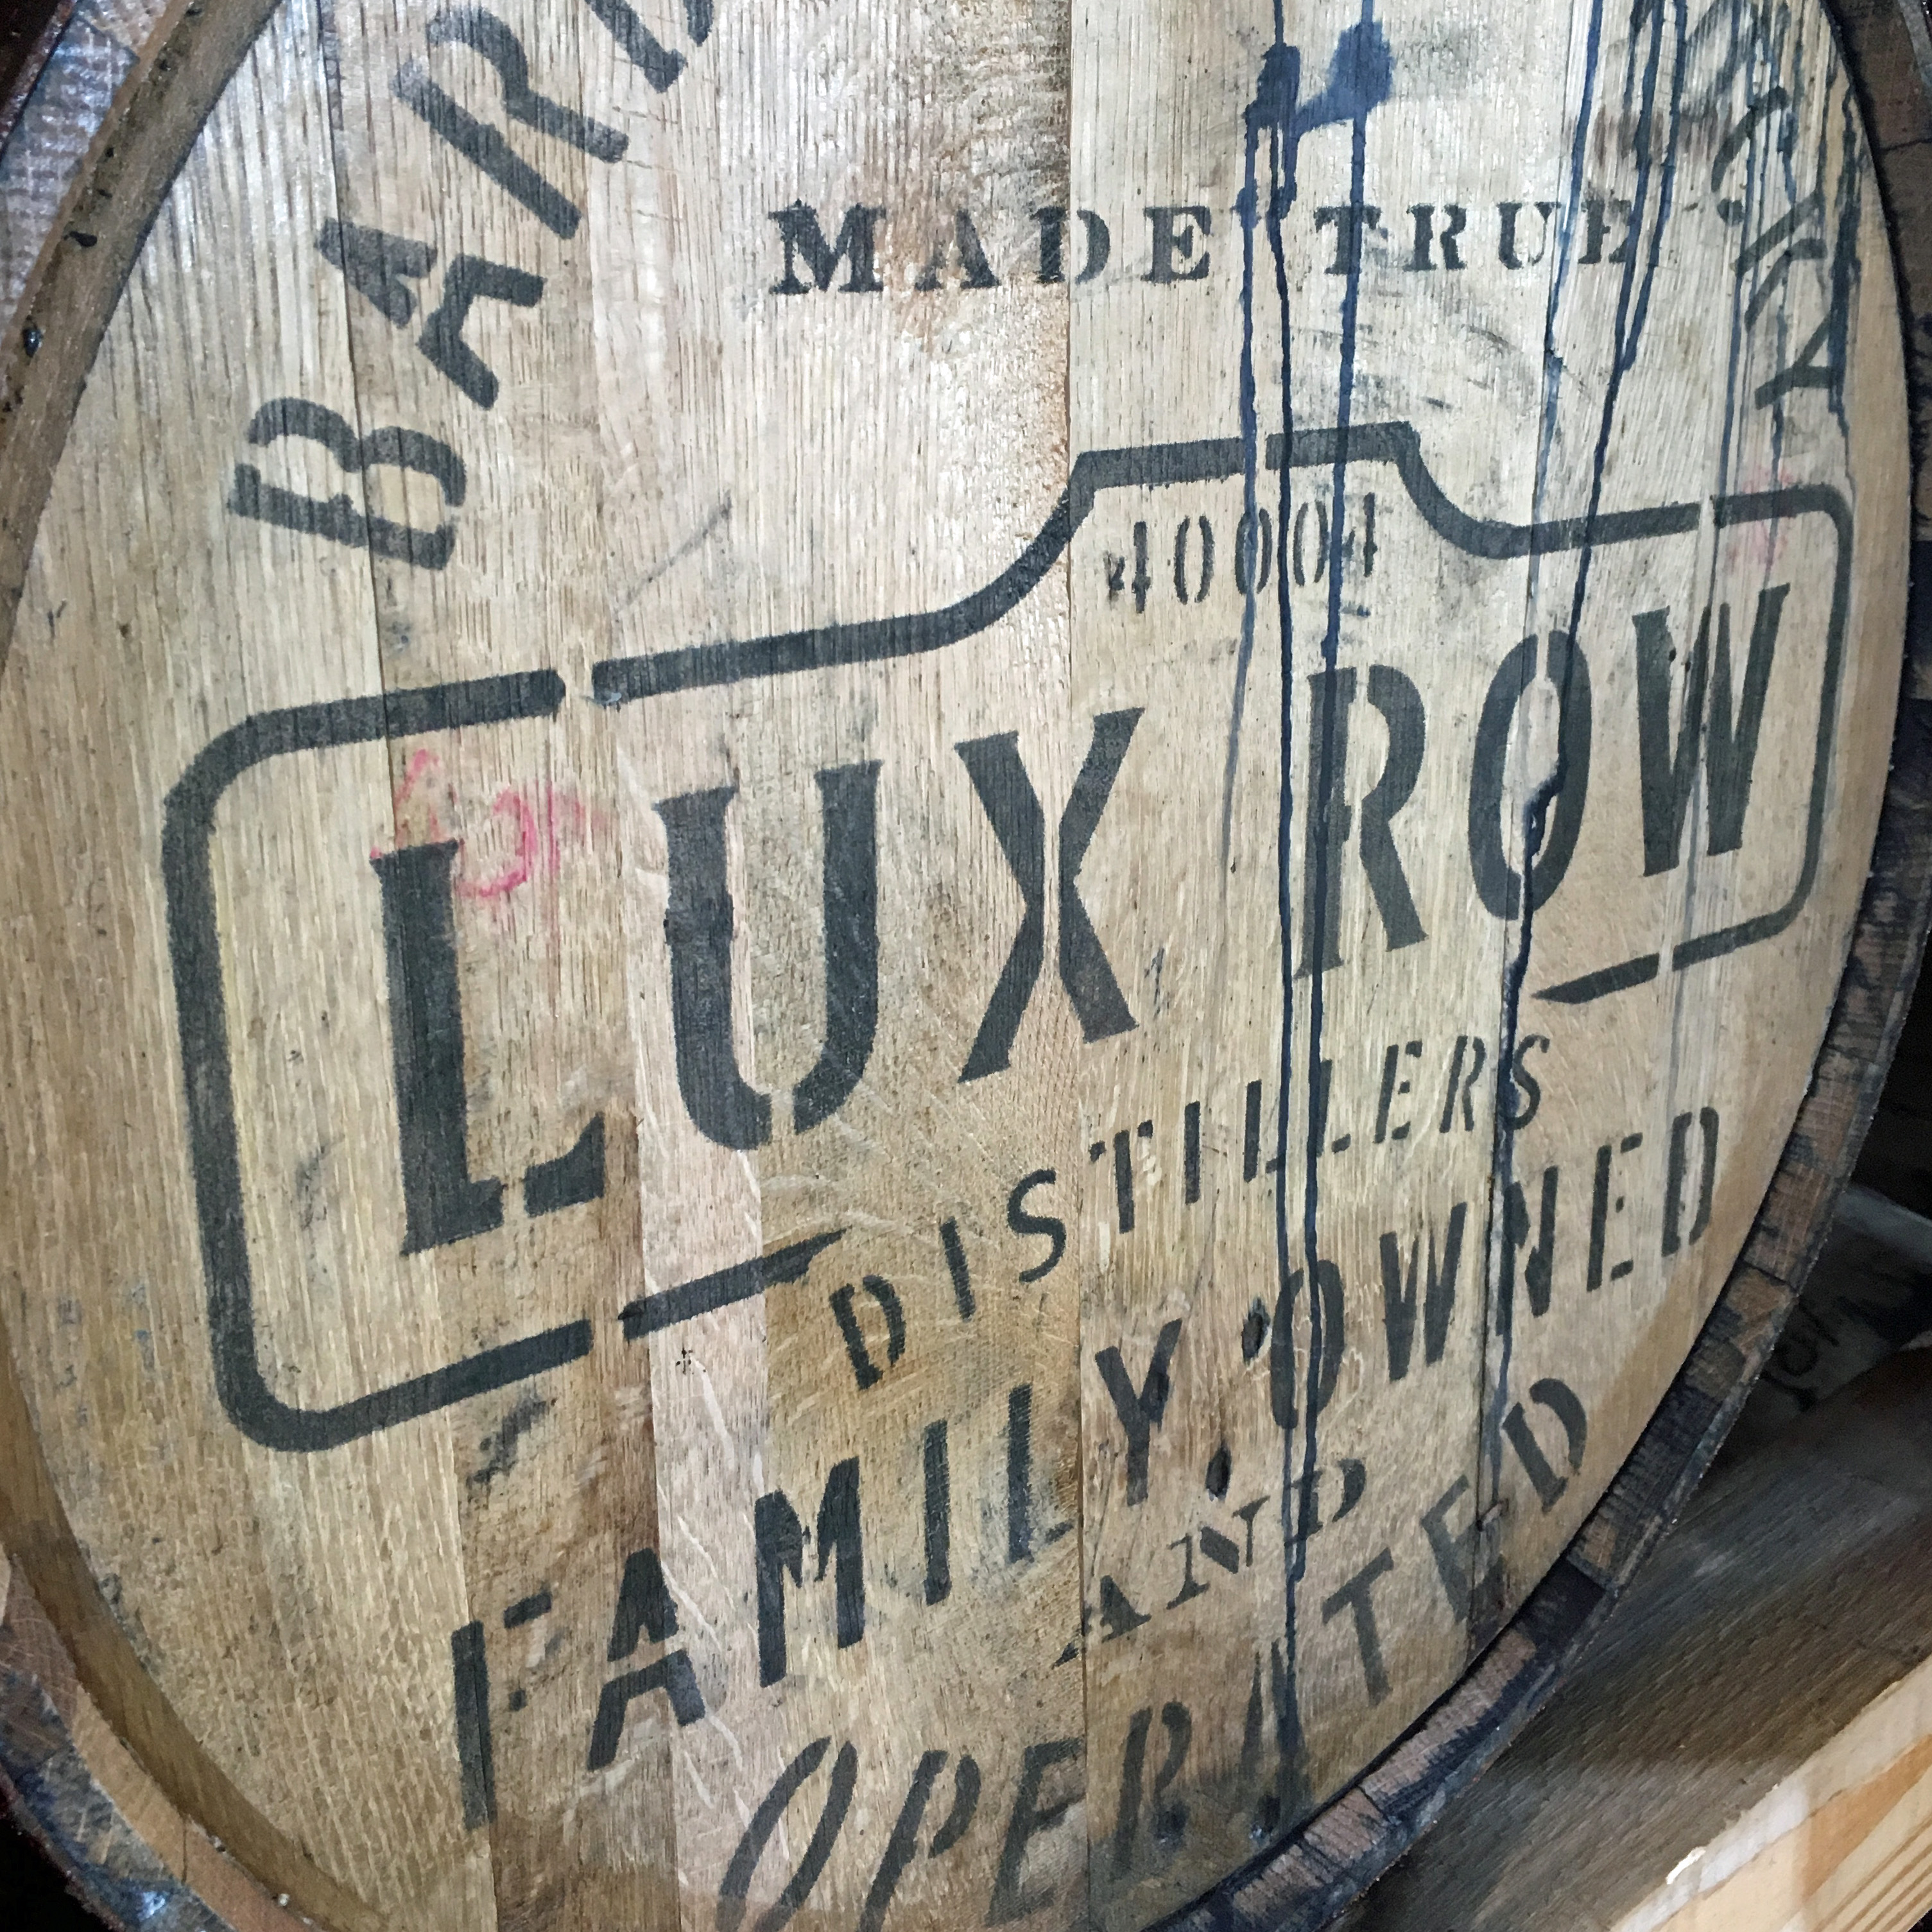 Lux Row Distillers Tour and Tasting on the Kentucky Bourbon Trail®